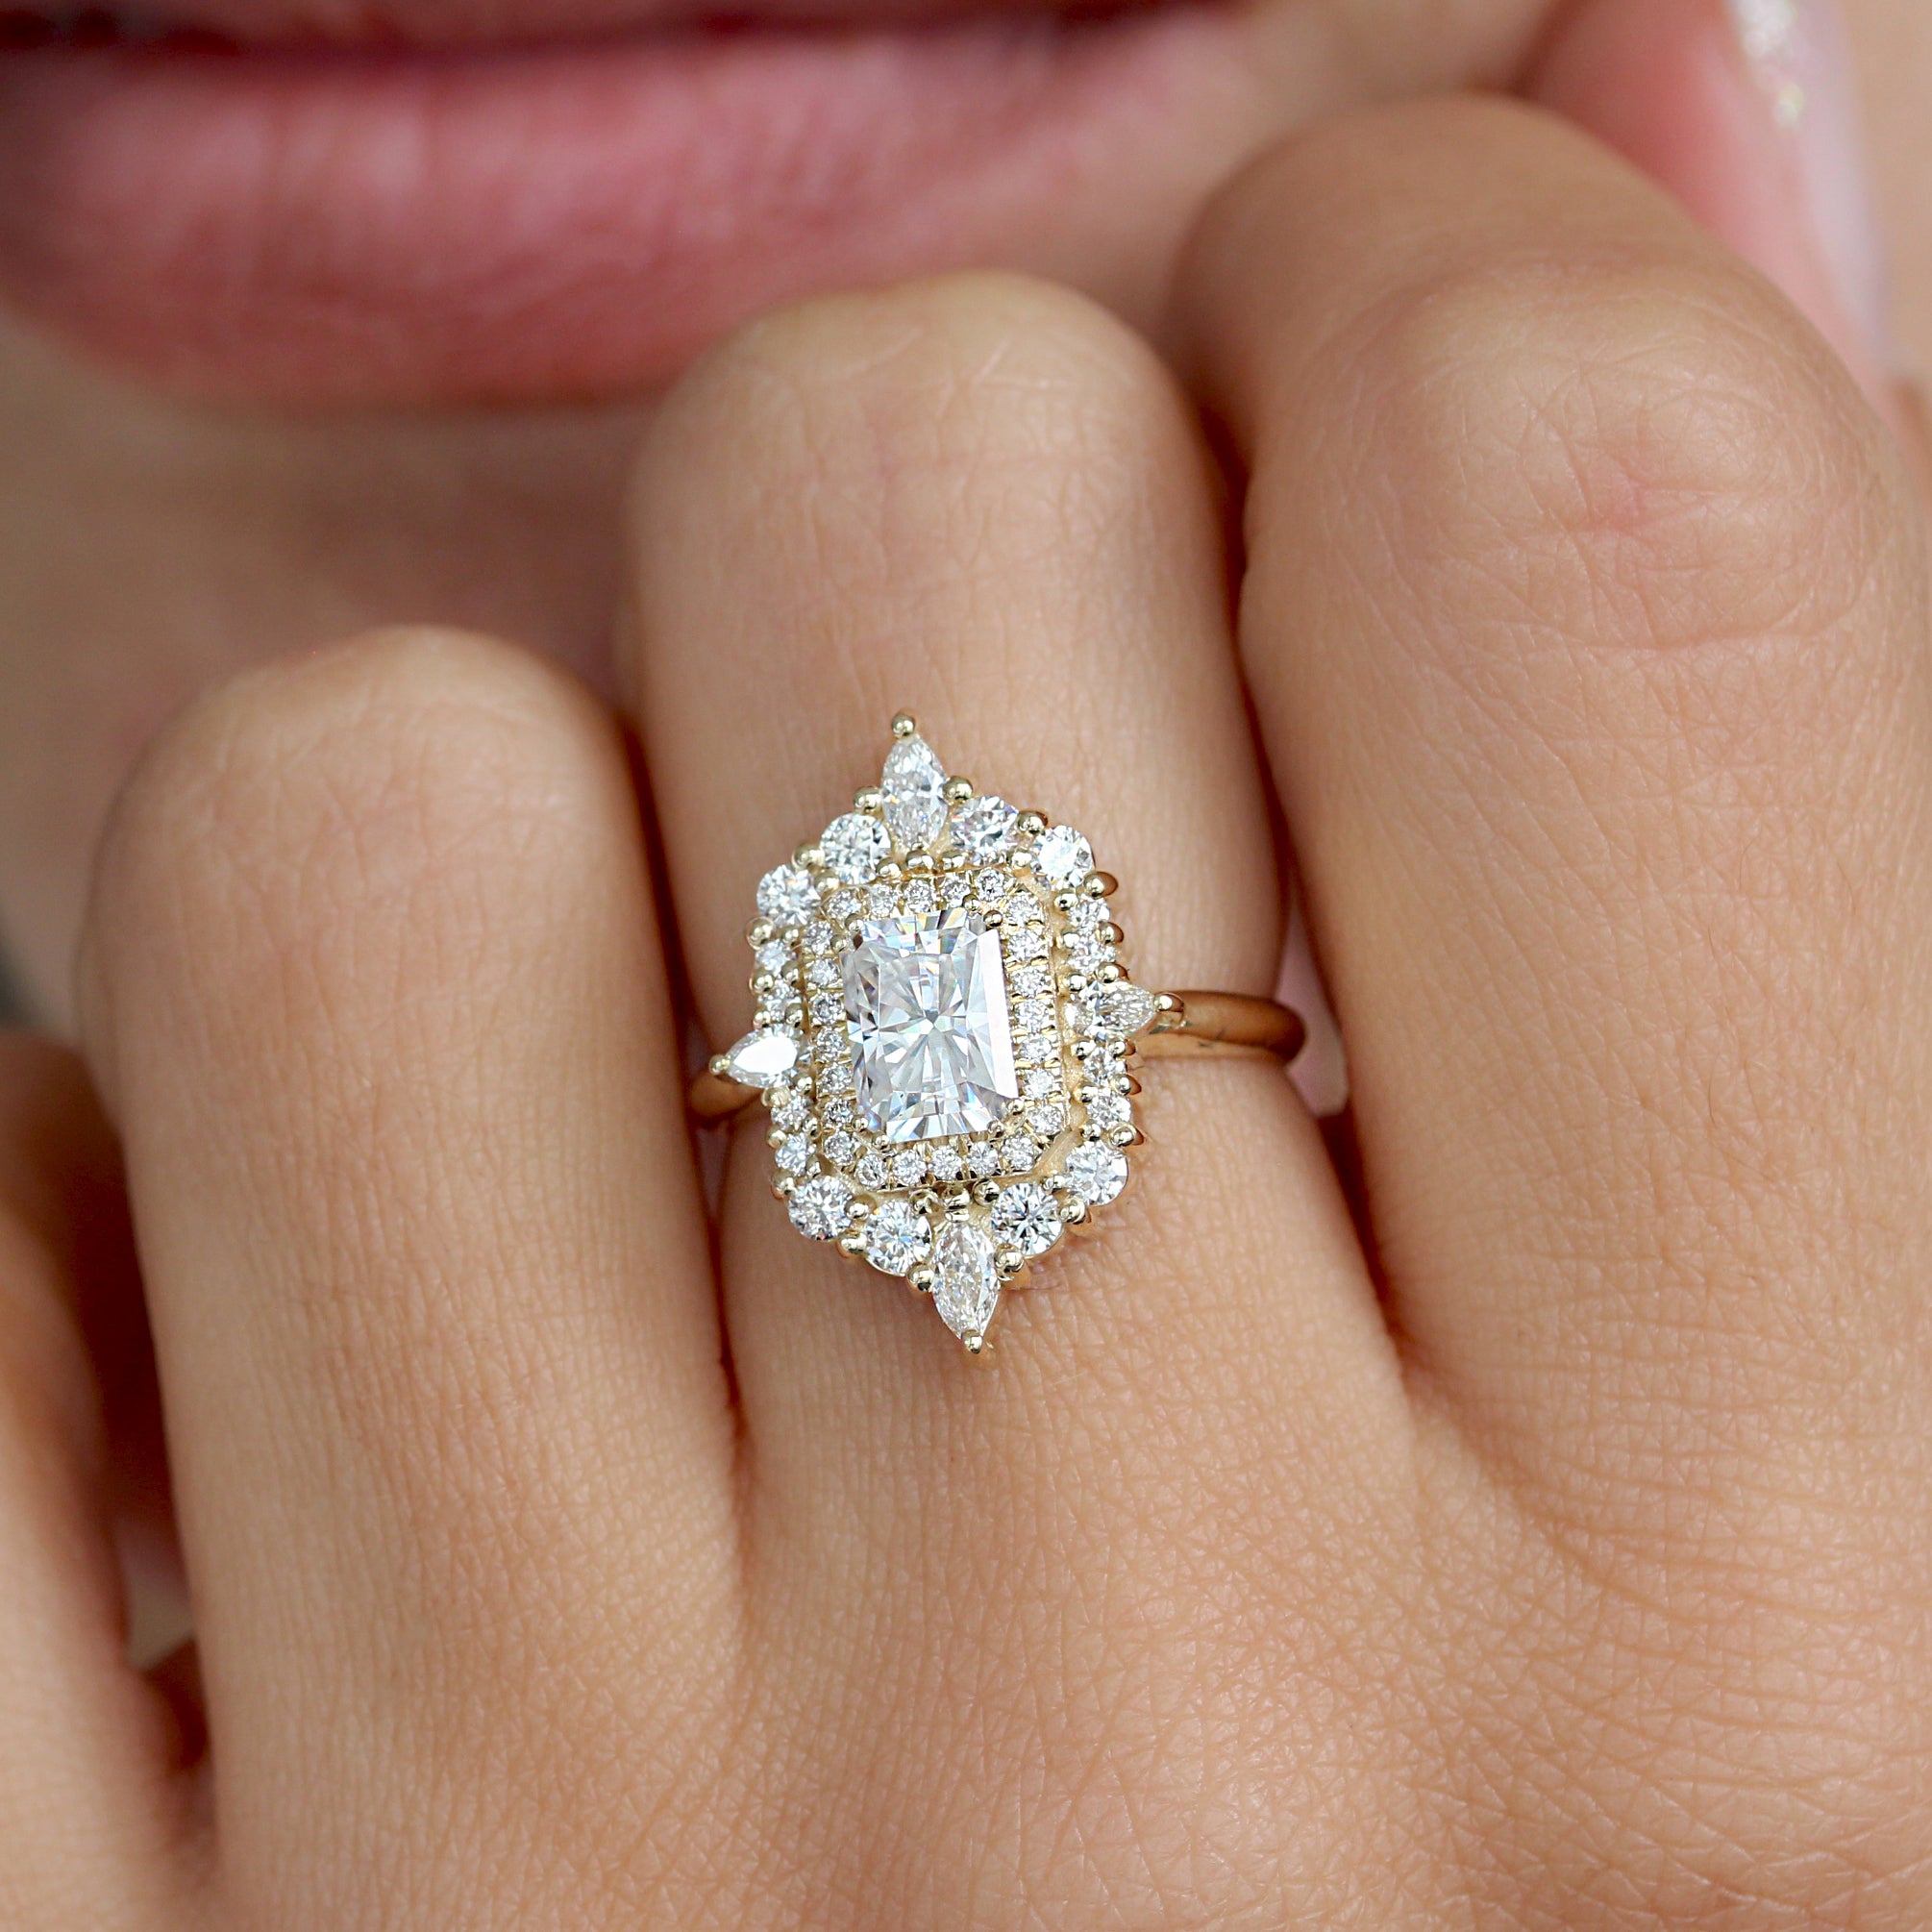 Radiant Cut Double Halo Diamond Engagement Ring "Andy”